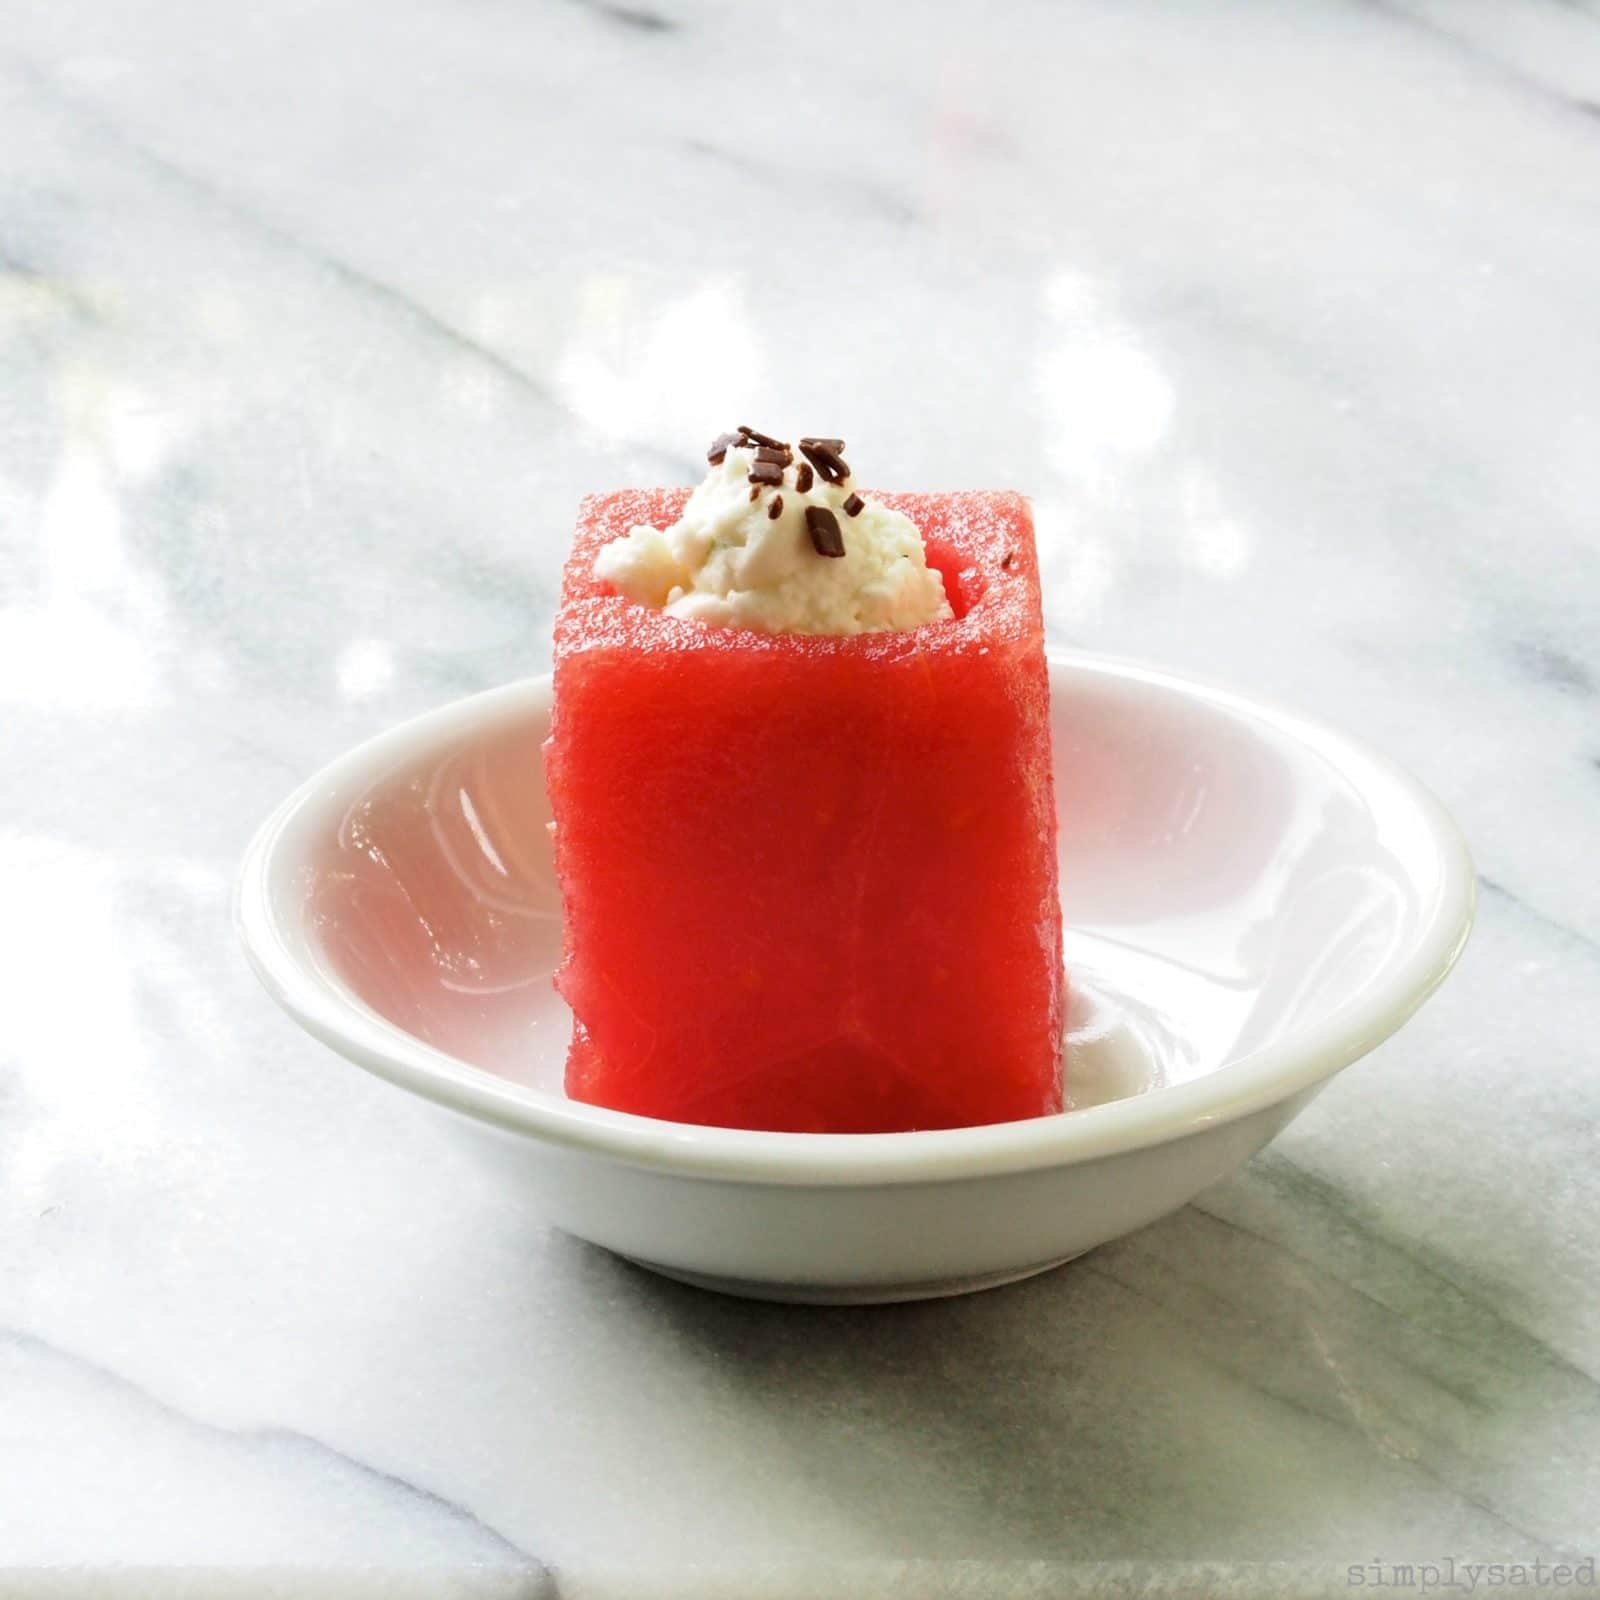 Watermelon with Mascarpone is healthy, light with a surprise in every bite. And it is a fun & delicious twist on serving this seasonal treat.